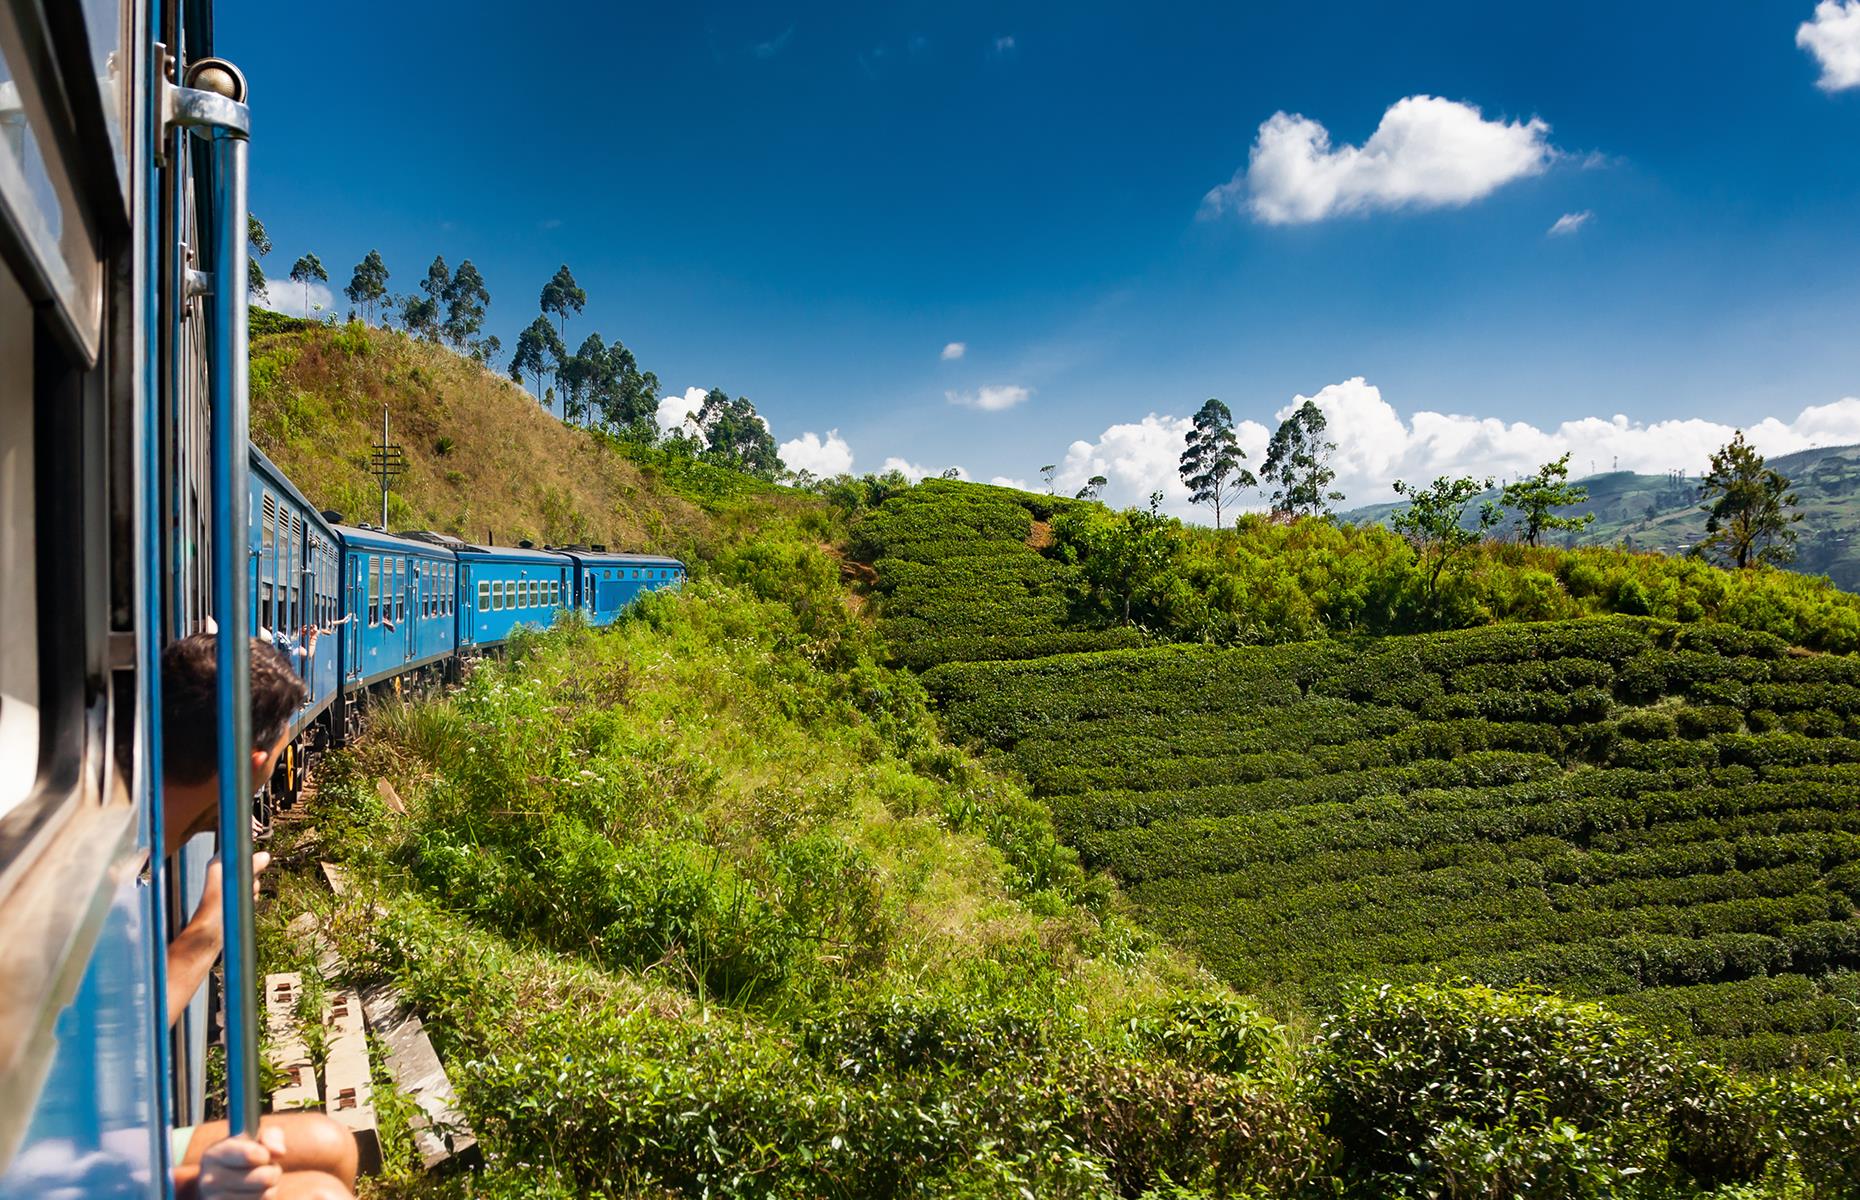 Built by the British in the late 1800s, Sri Lanka's rail system was originally used to transport tea and coffee for export so it's no surprise that this seven-hour trip takes passengers through stunning tea plantations, remote villages, lush green hills and tumbling waterfalls. If you're traveling from Kandy, know that the better views are from the seats on the right.